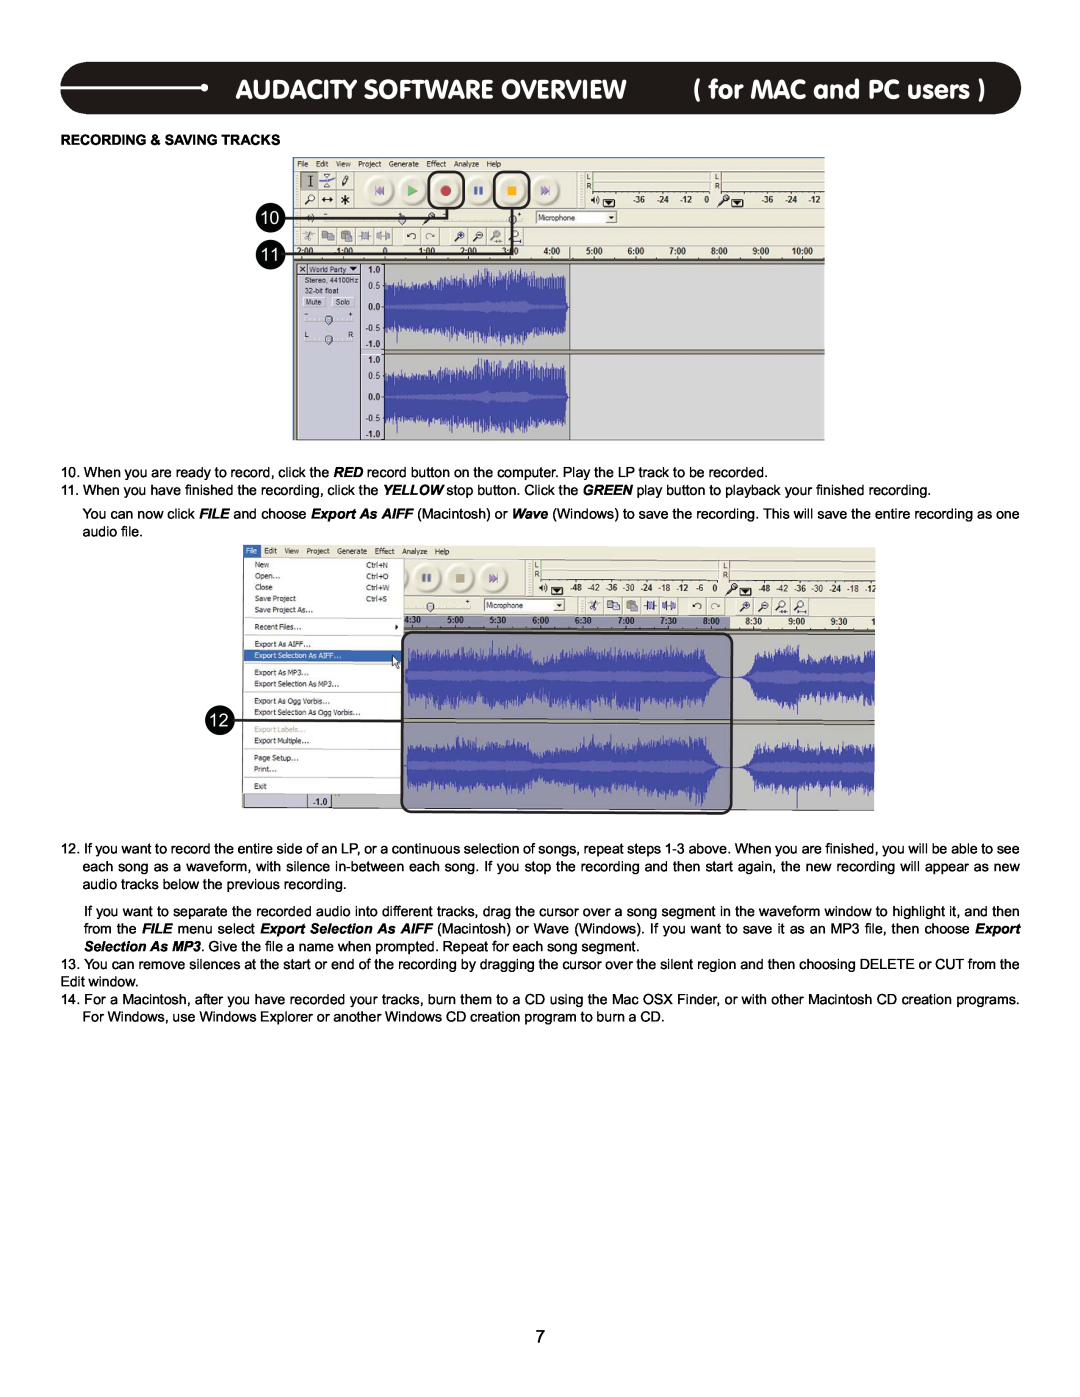 Stanton T.62 user manual Audacity Software Overview, for MAC and PC users, Recording & Saving Tracks 